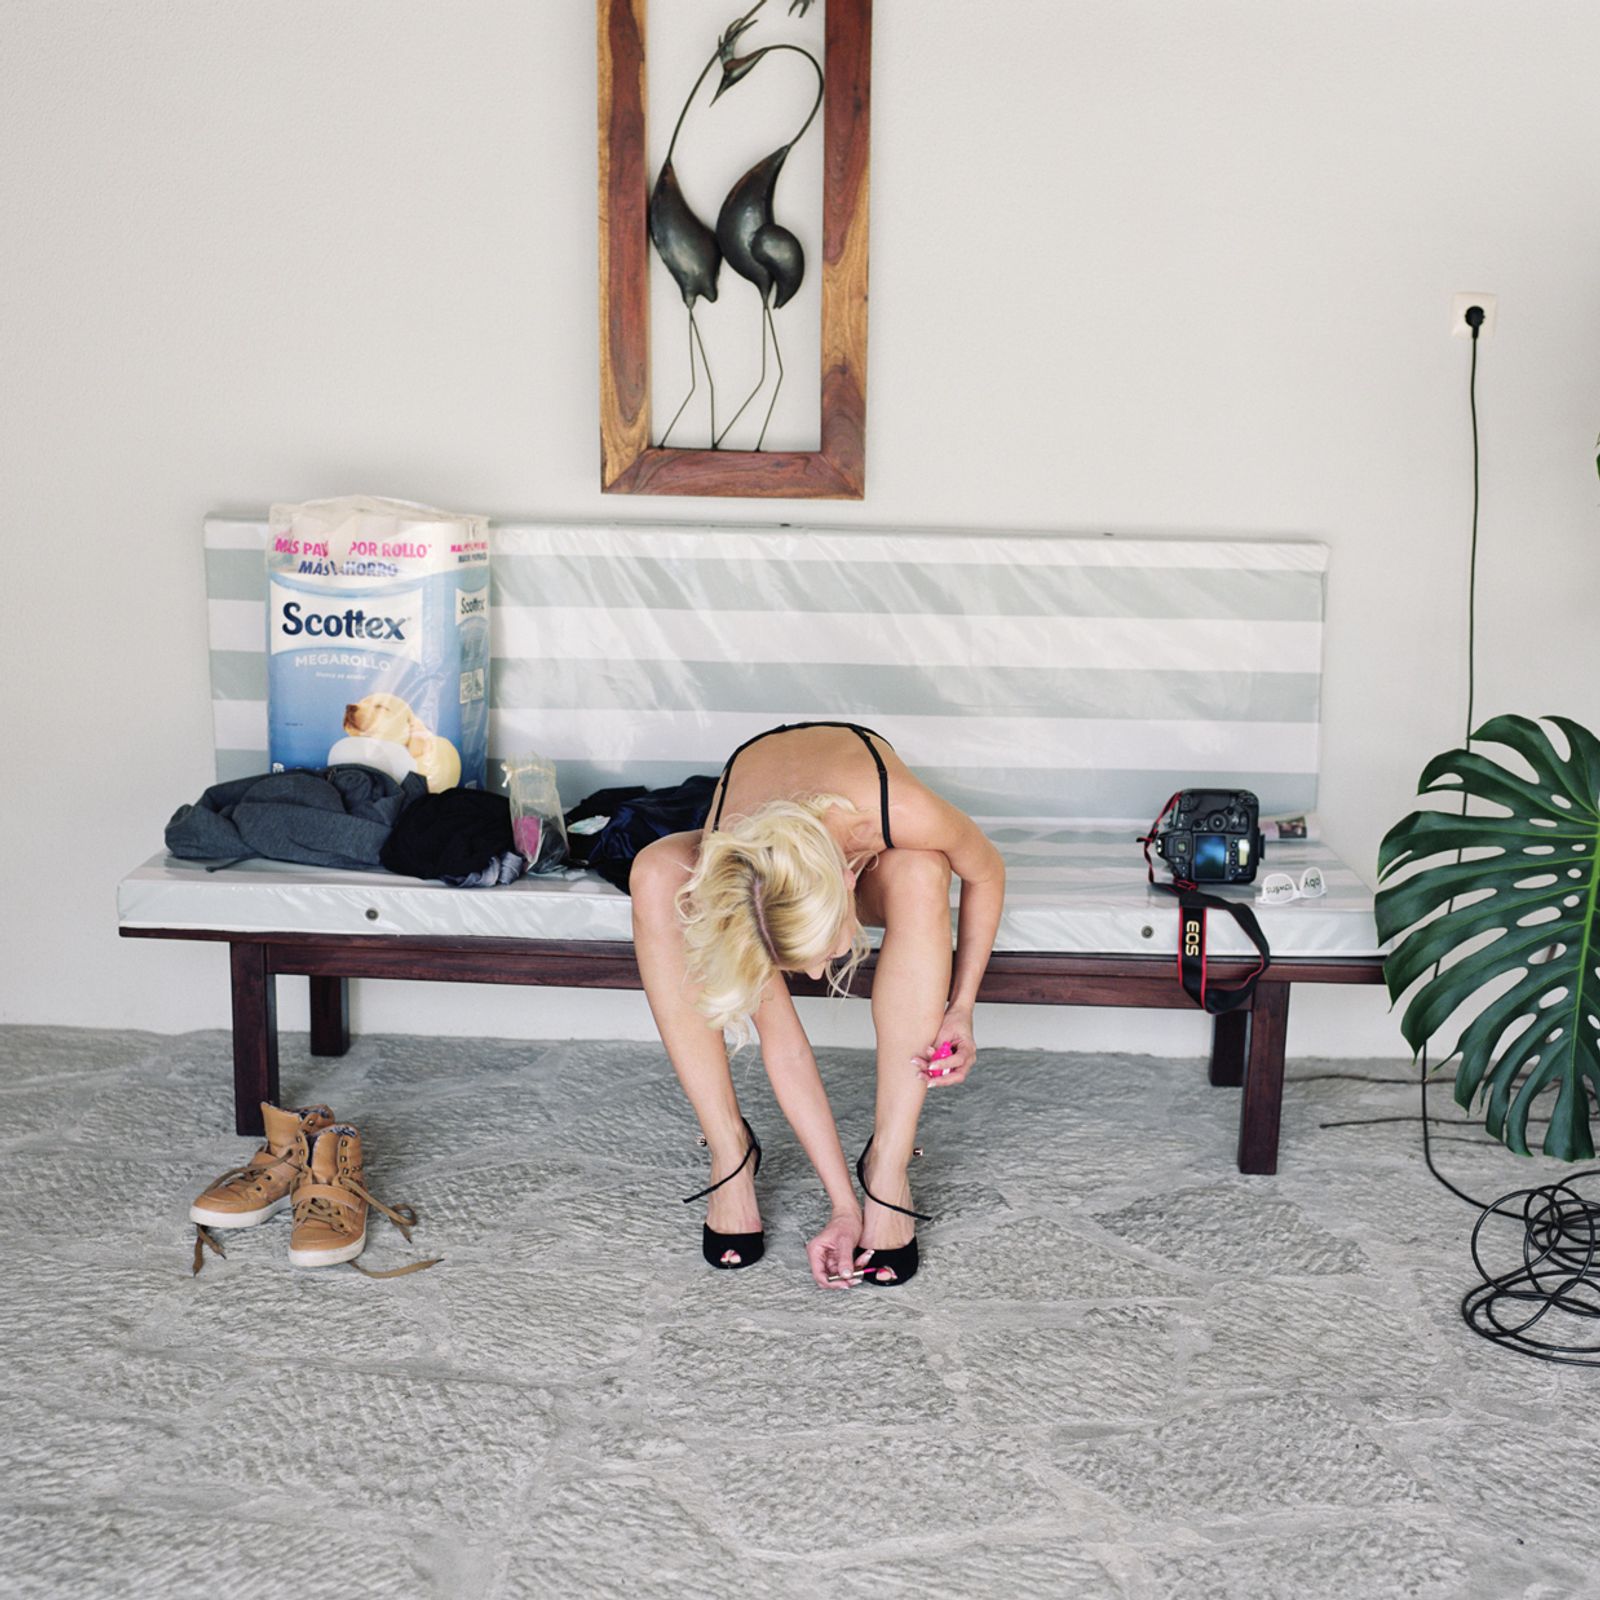 © Sophie Ebrard - Image from the IT'S JUST LOVE  photography project